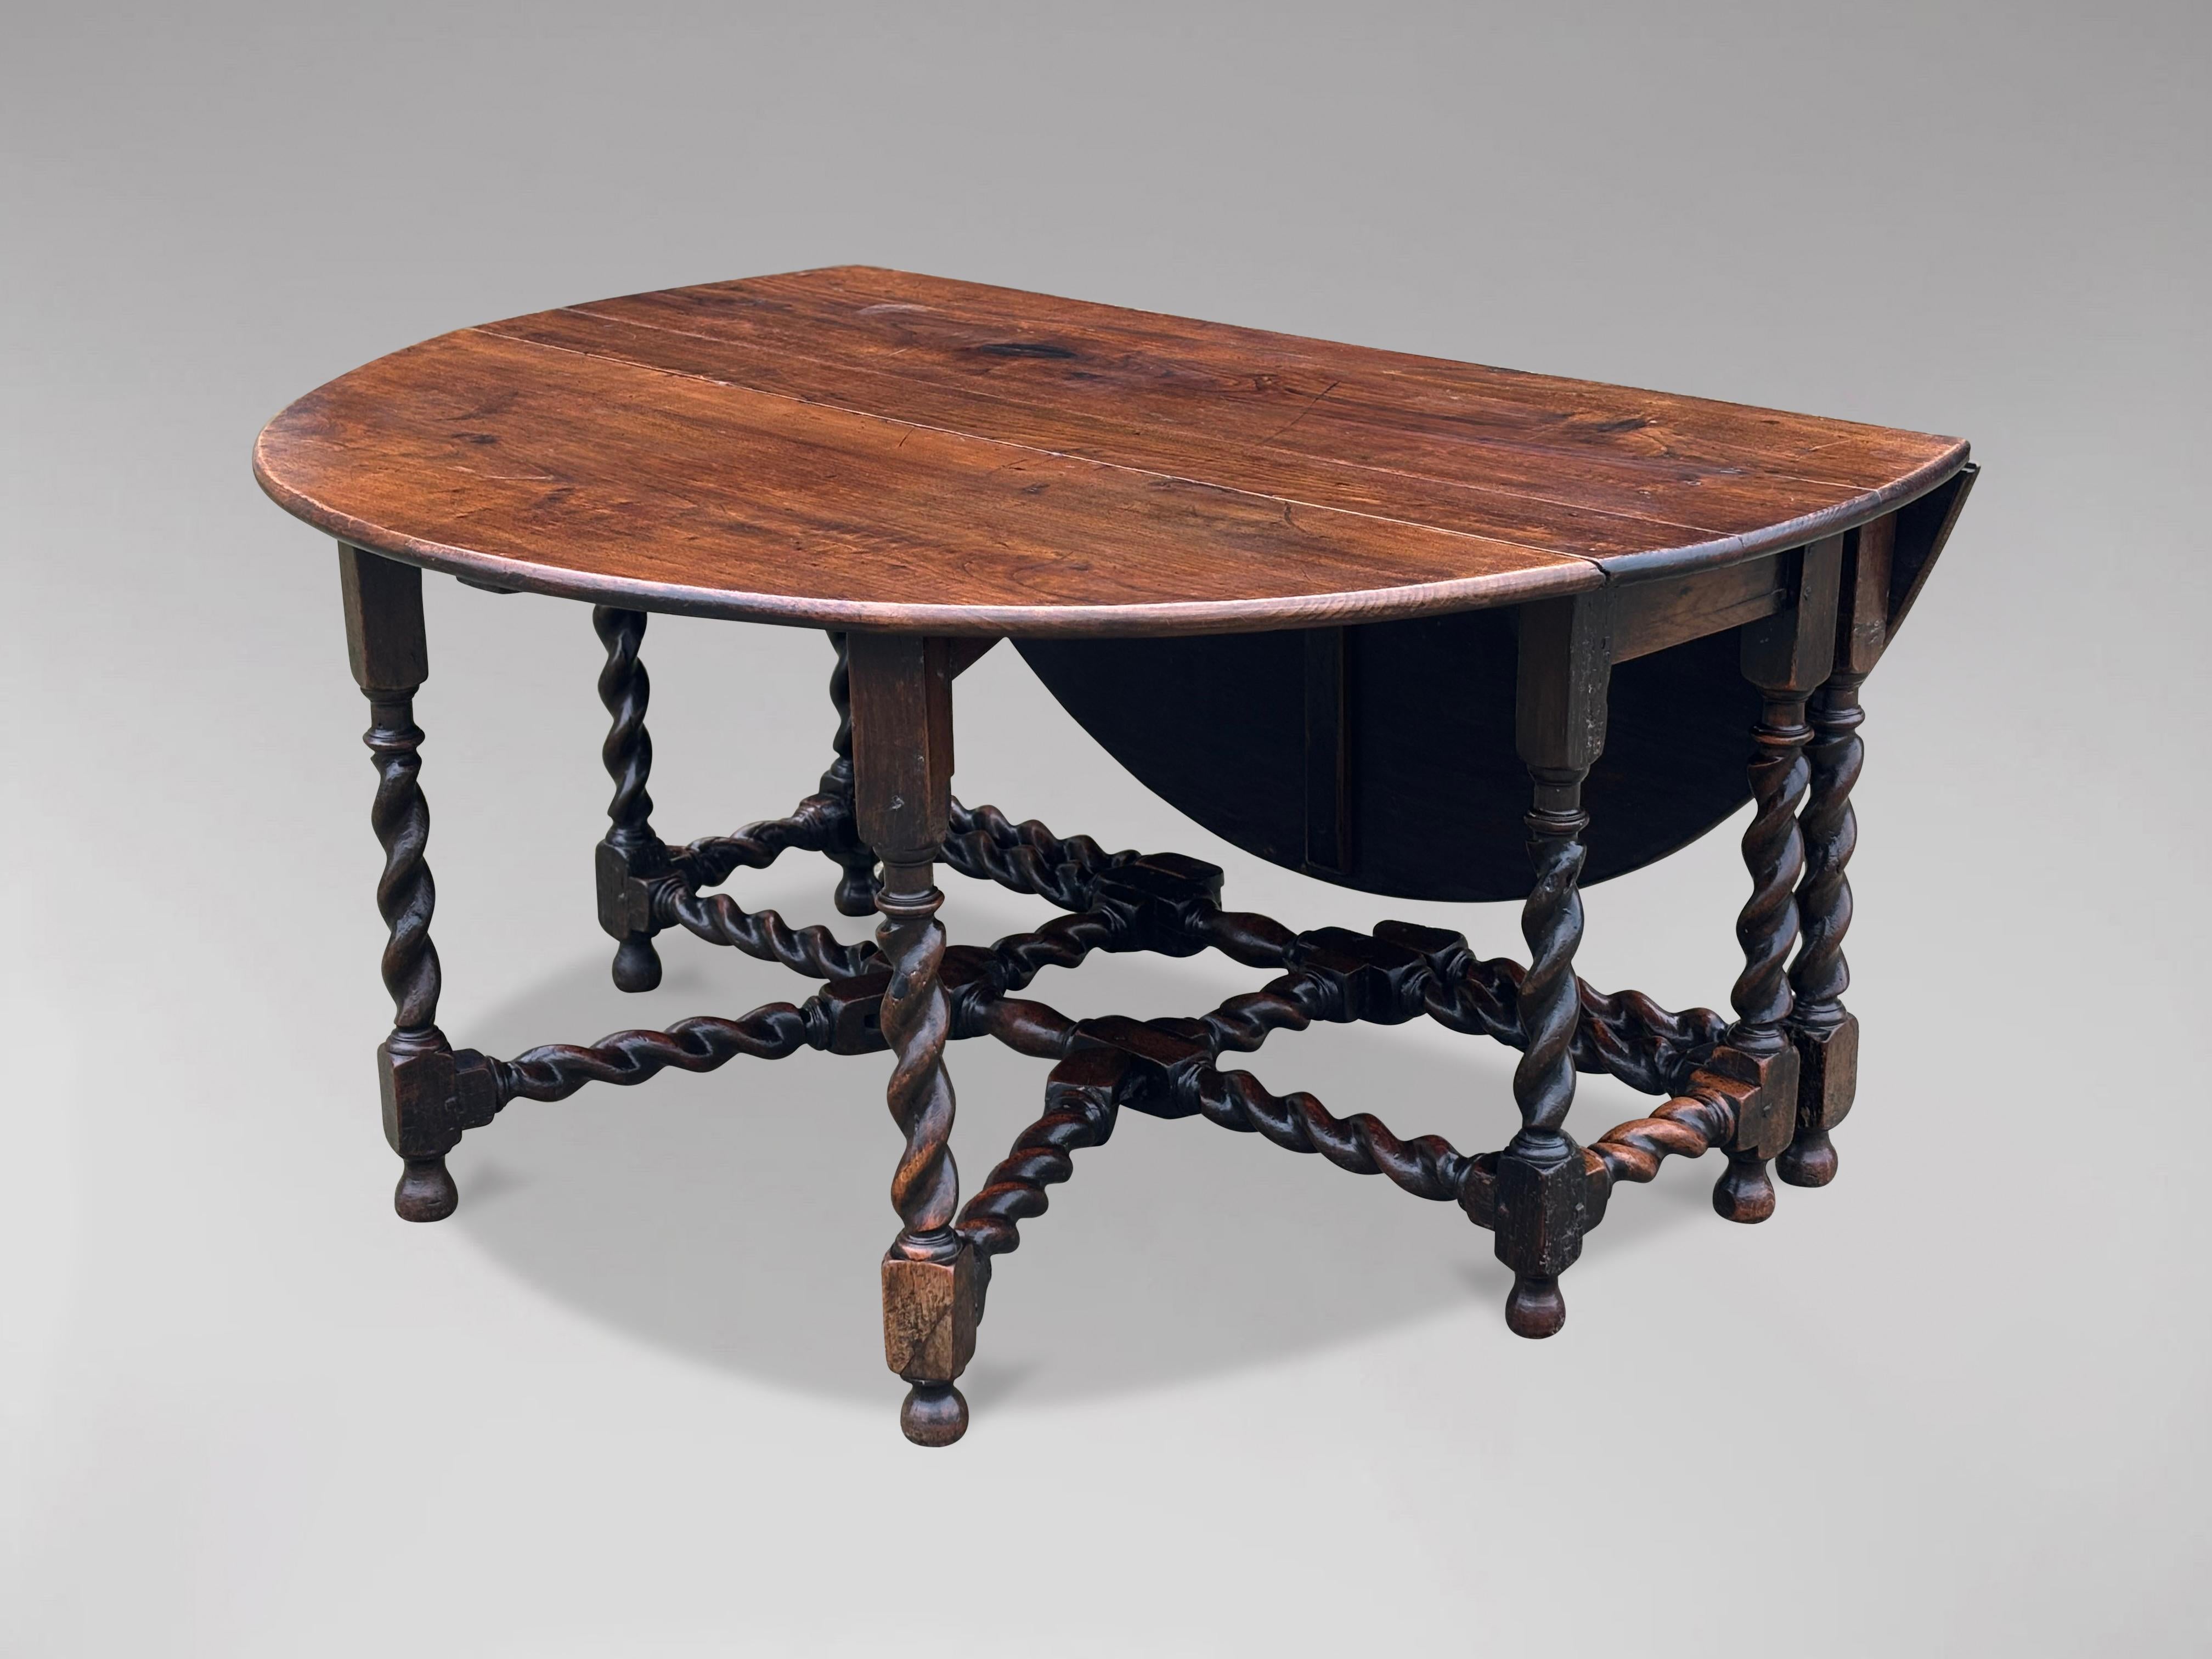 British Large 17th Century Charles II Period Solid Oak Double Gateleg Table For Sale